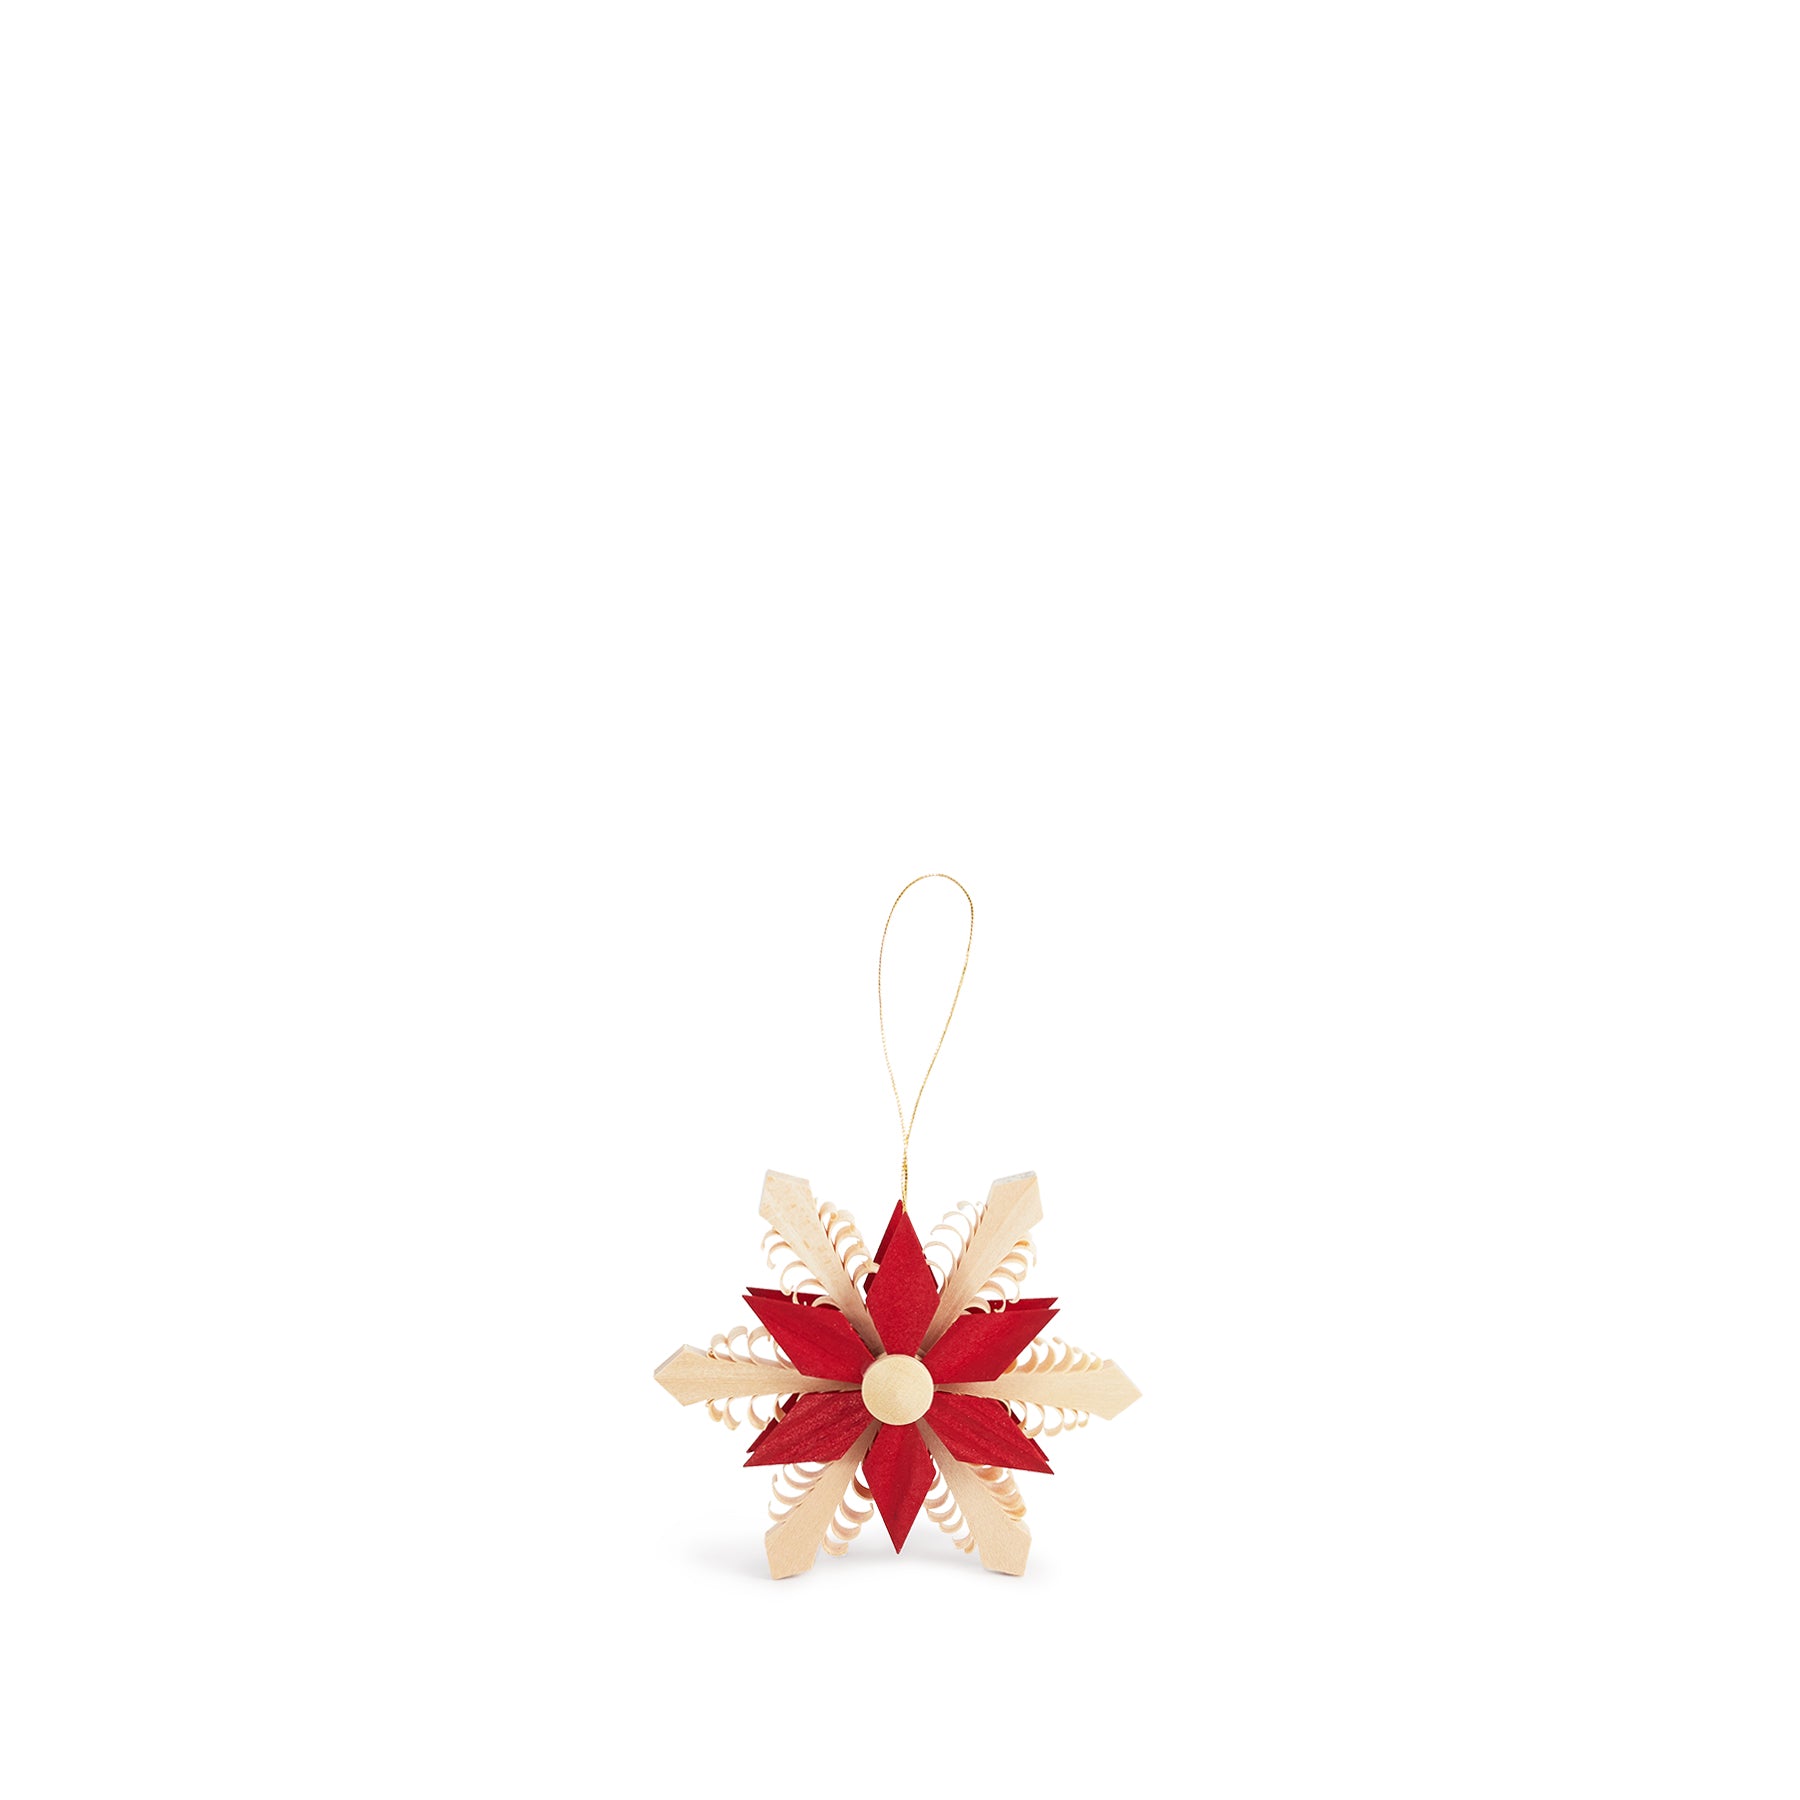 Star Ornament in Natural/Red 3.5" Zoom Image 1